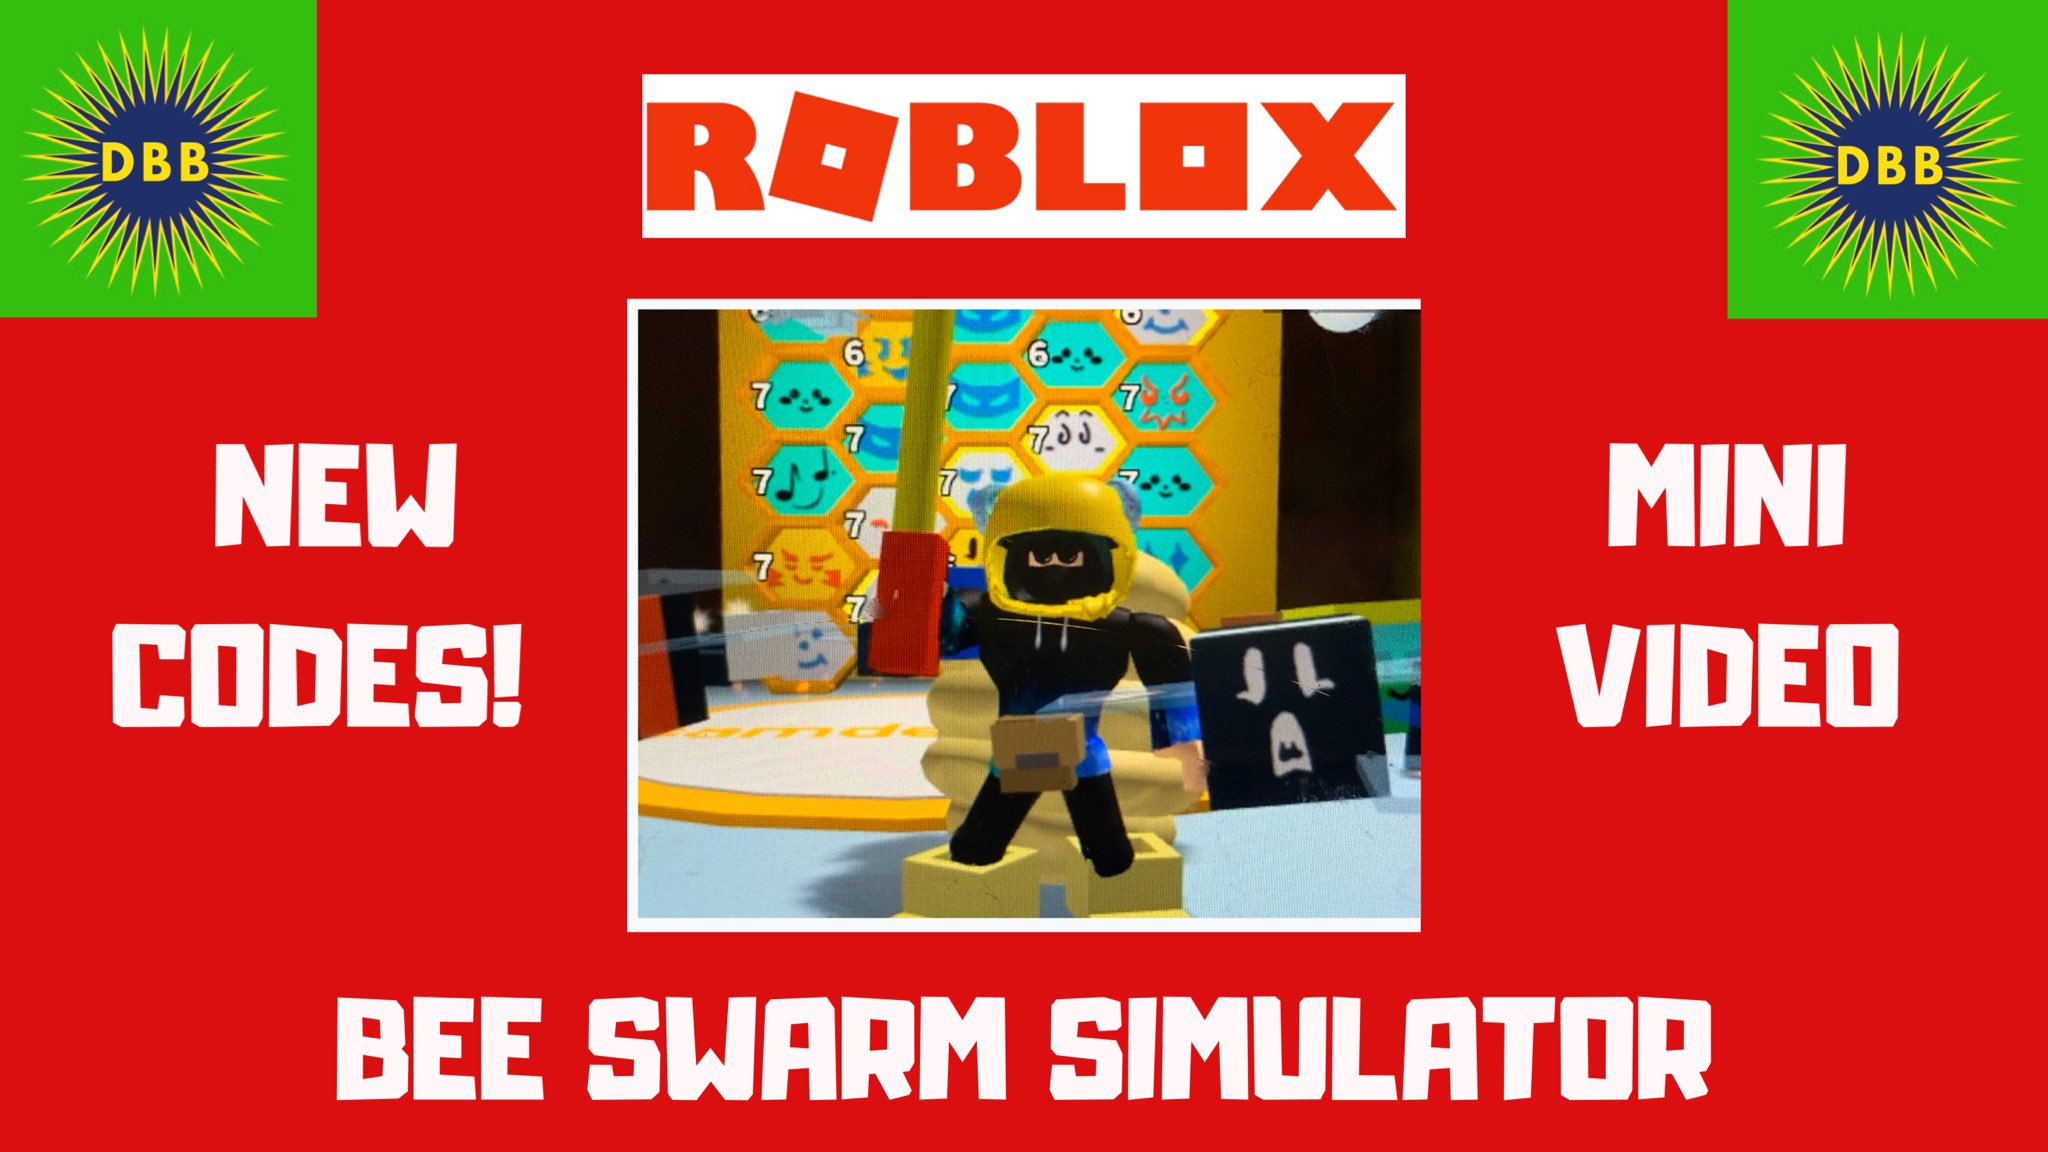 Deathbotbrothers On Twitter Roblox Codes Bee Swarm Simulator This Is A Mini Video Just To Let You Https T Co Phvgueo4sj Via Youtube Roblox Robloxcodes Robloxbeeswarm Beeswarmcodes Robloxbeeswarmcodes Beeswarmsimulator Https T Co - youtube roblox bee swarm code